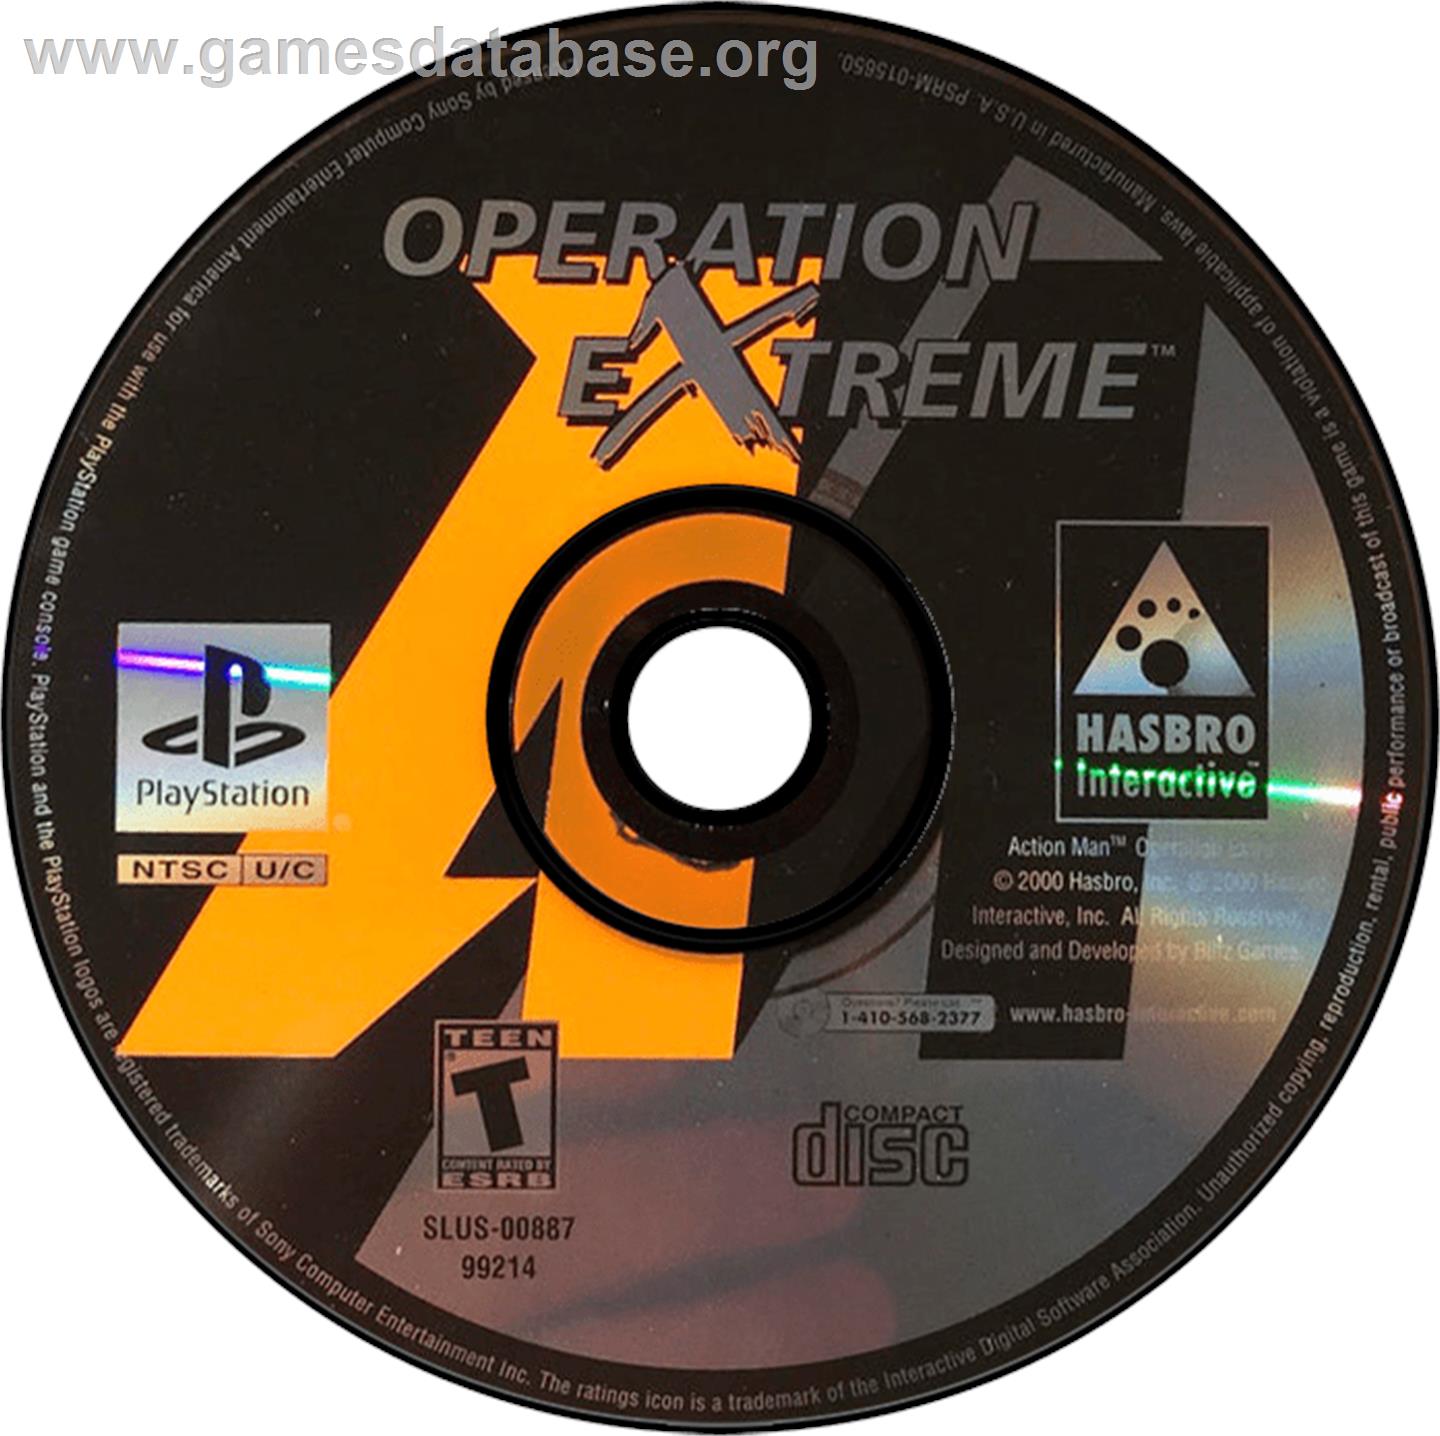 Action Man: Operation Extreme - Sony Playstation - Artwork - Disc